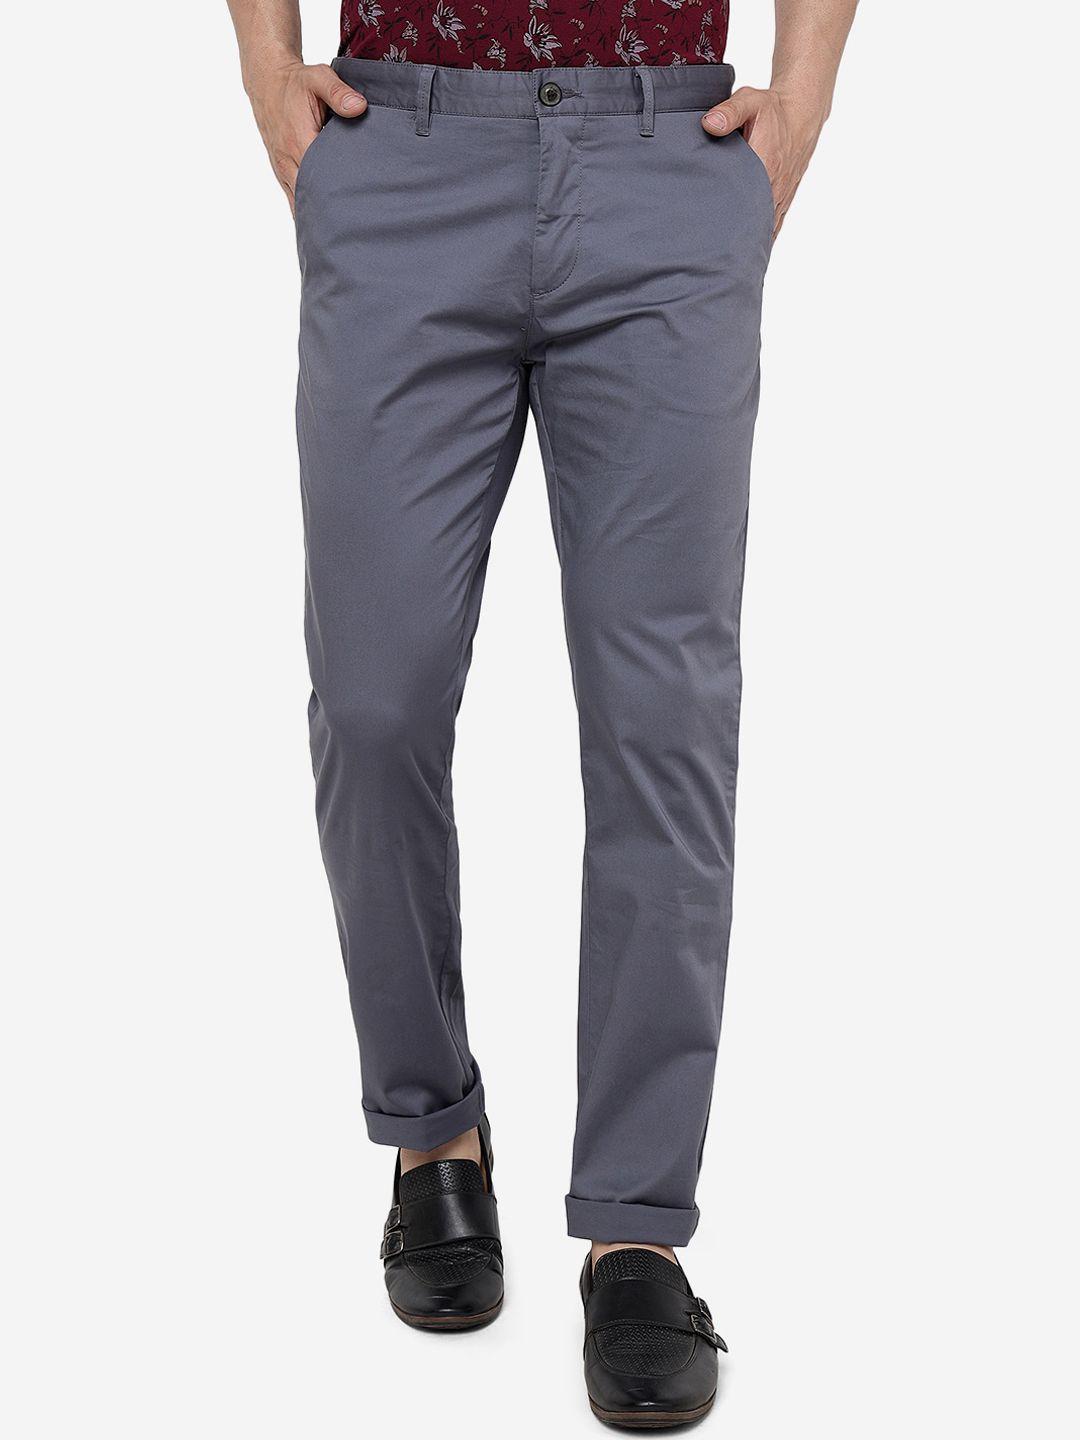 jade blue men slim fit pure cotton chinos trousers